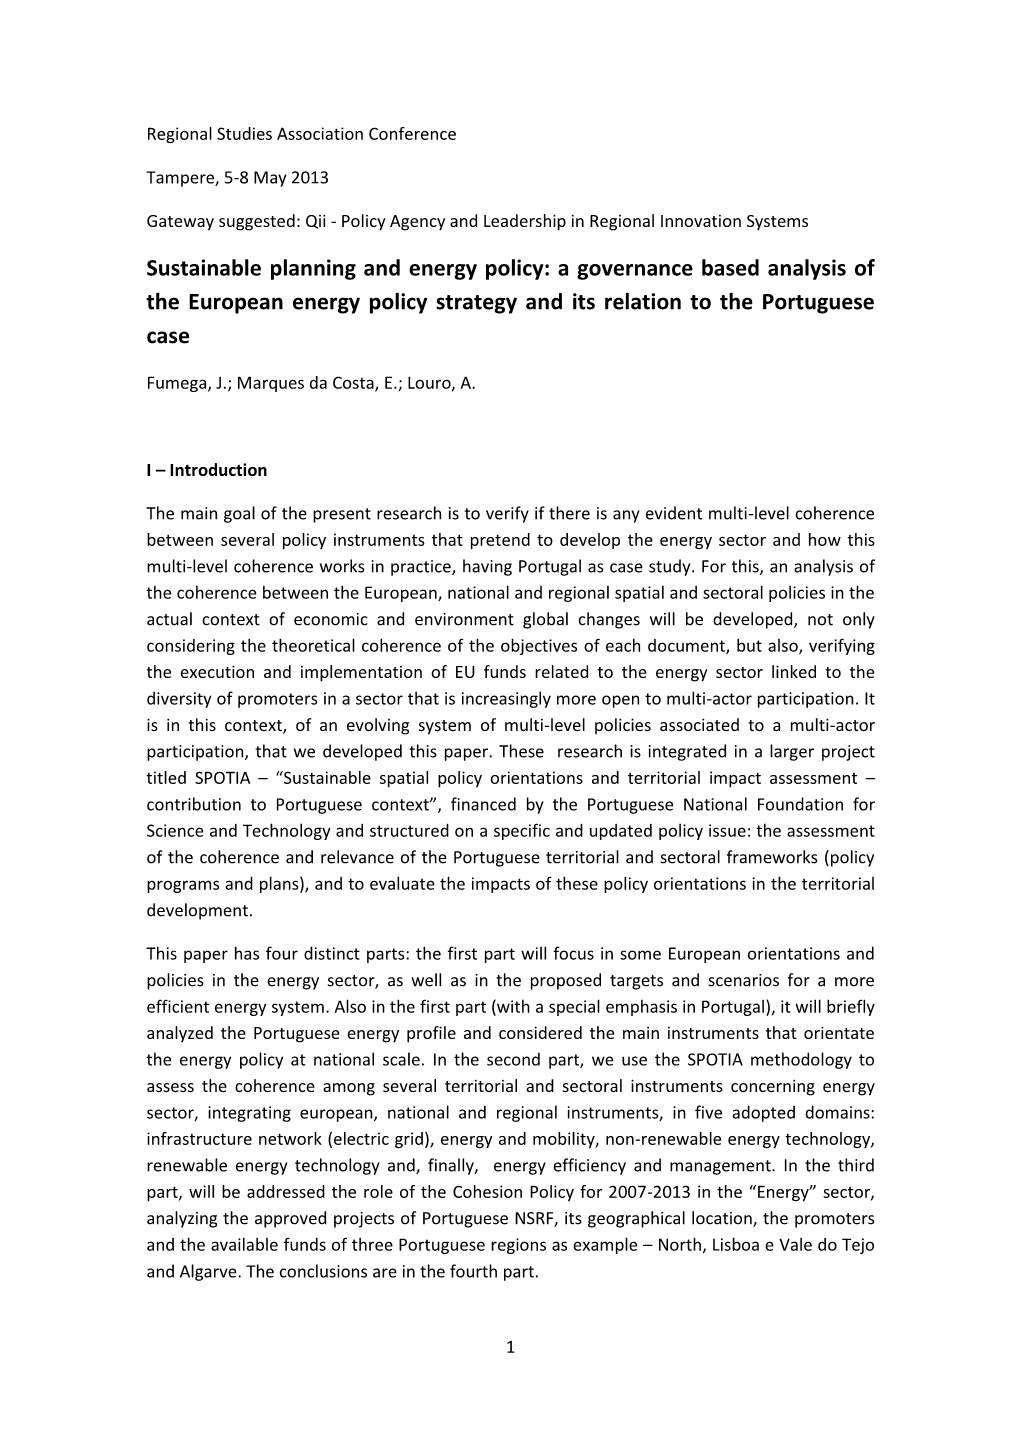 Sustainable Planning and Energy Policy: a Governance Based Analysis of the European Energy Policy Strategy and Its Relation to the Portuguese Case